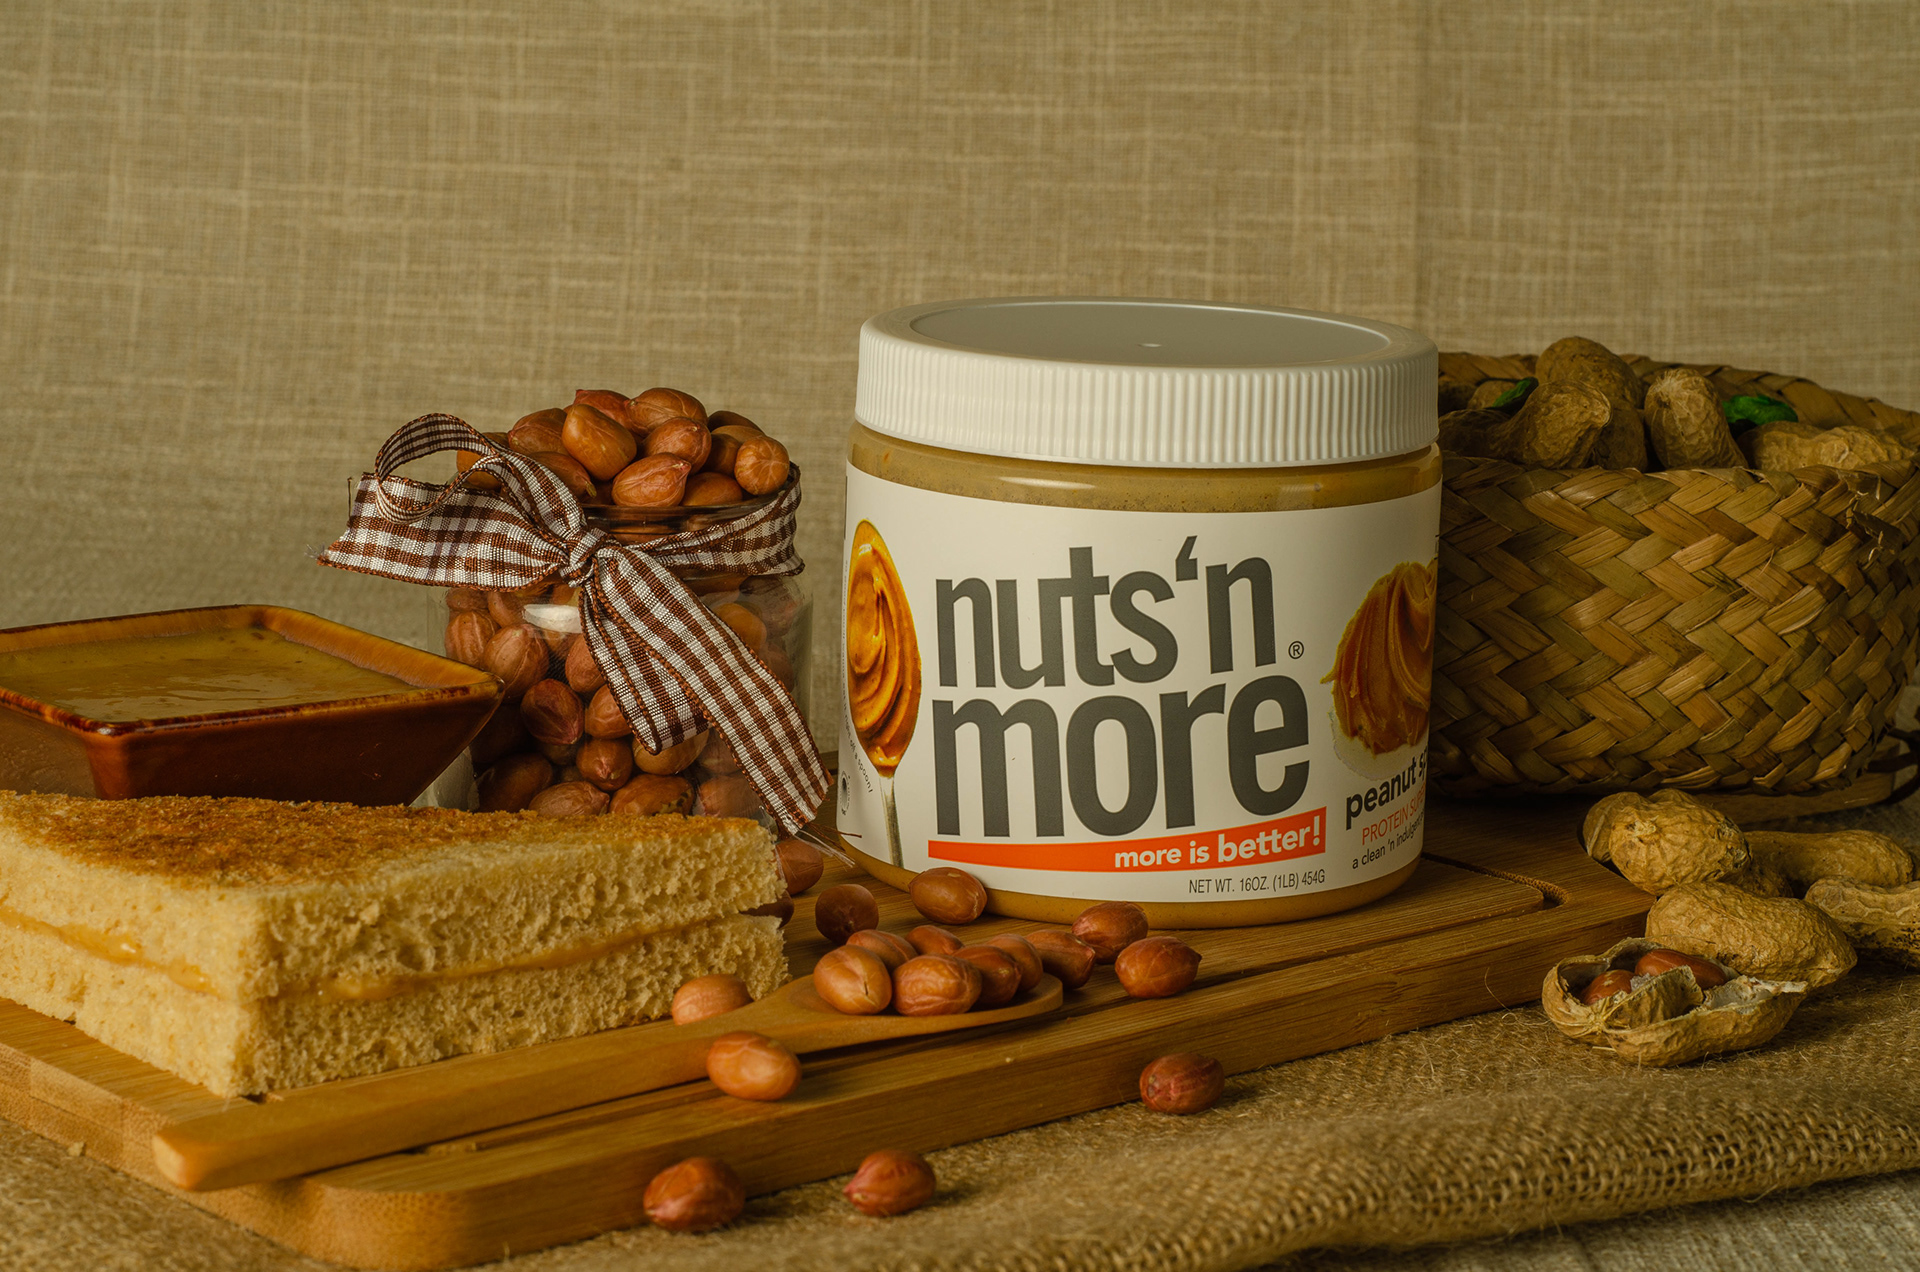 NUTS 'N MORE PRODUCT PHOTOGRAPHY